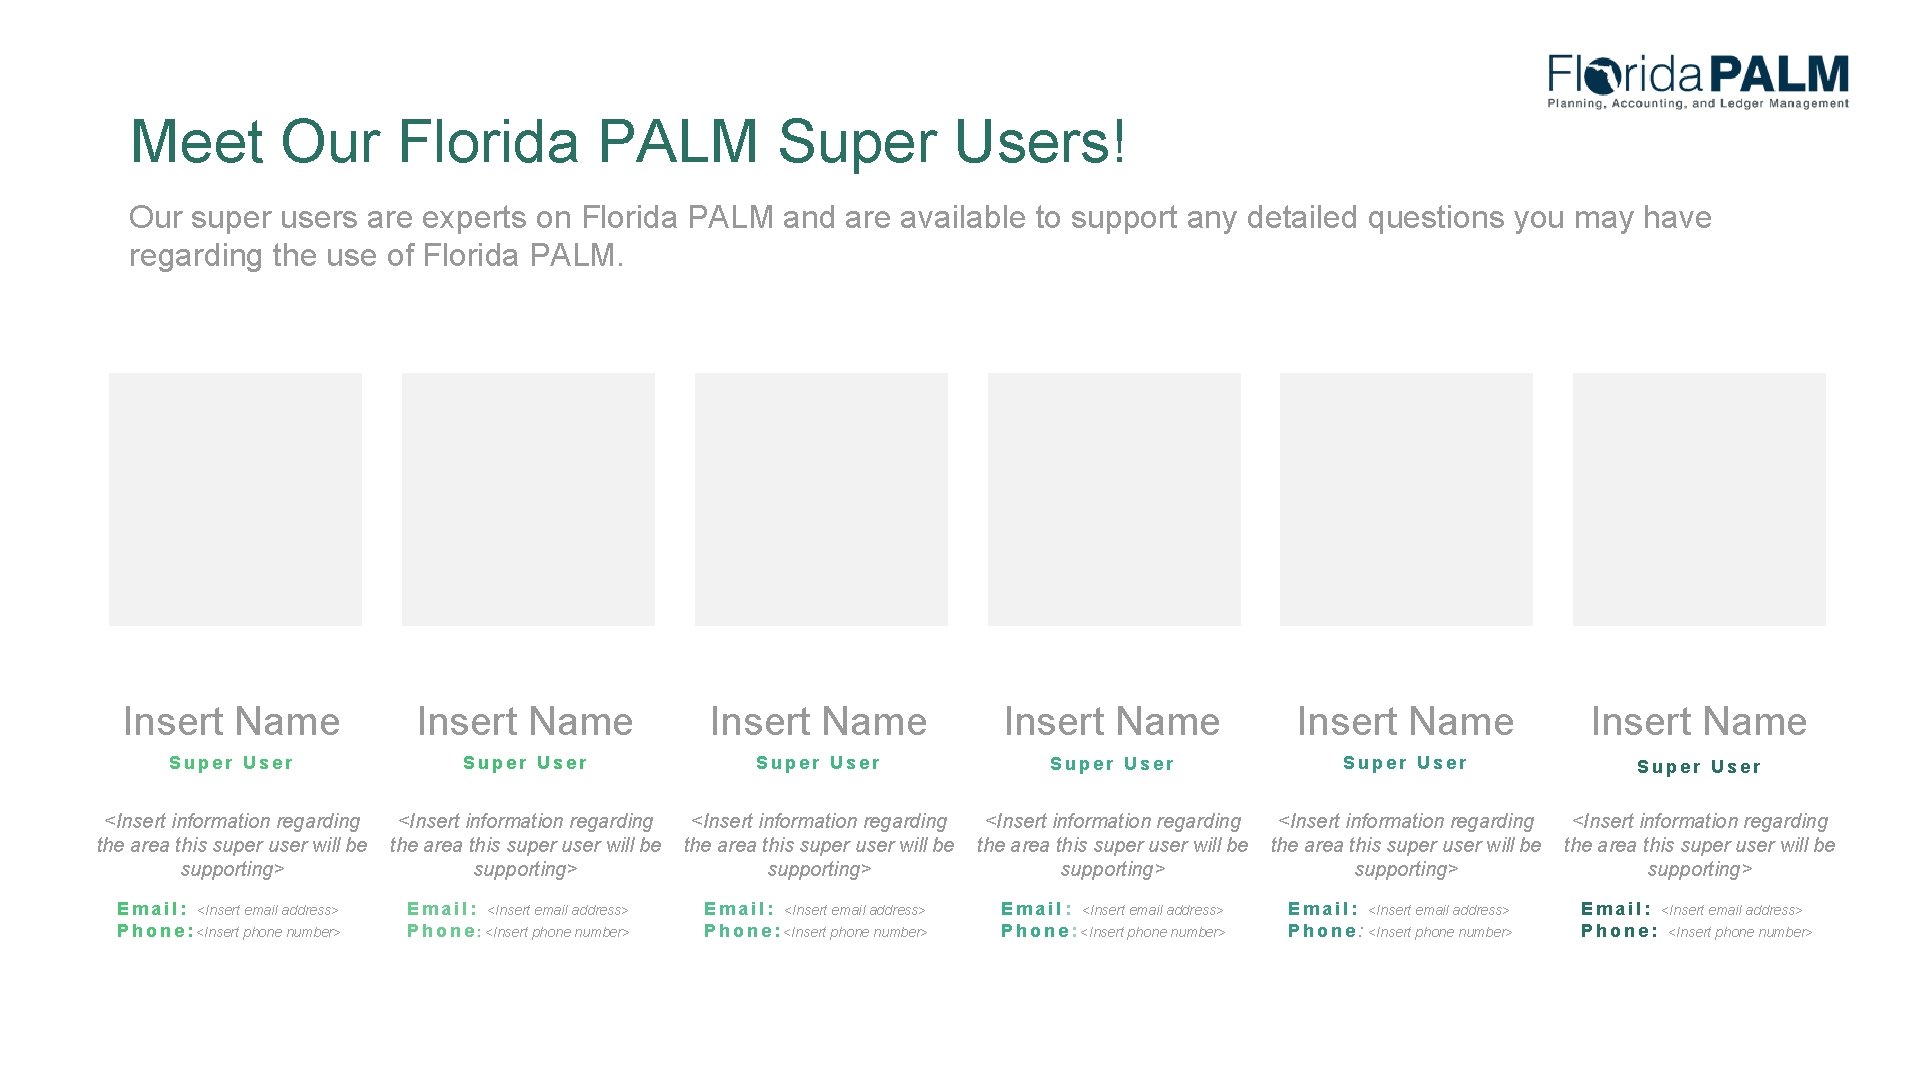 Meet Our Florida PALM Super Users! Our super users are experts on Florida PALM